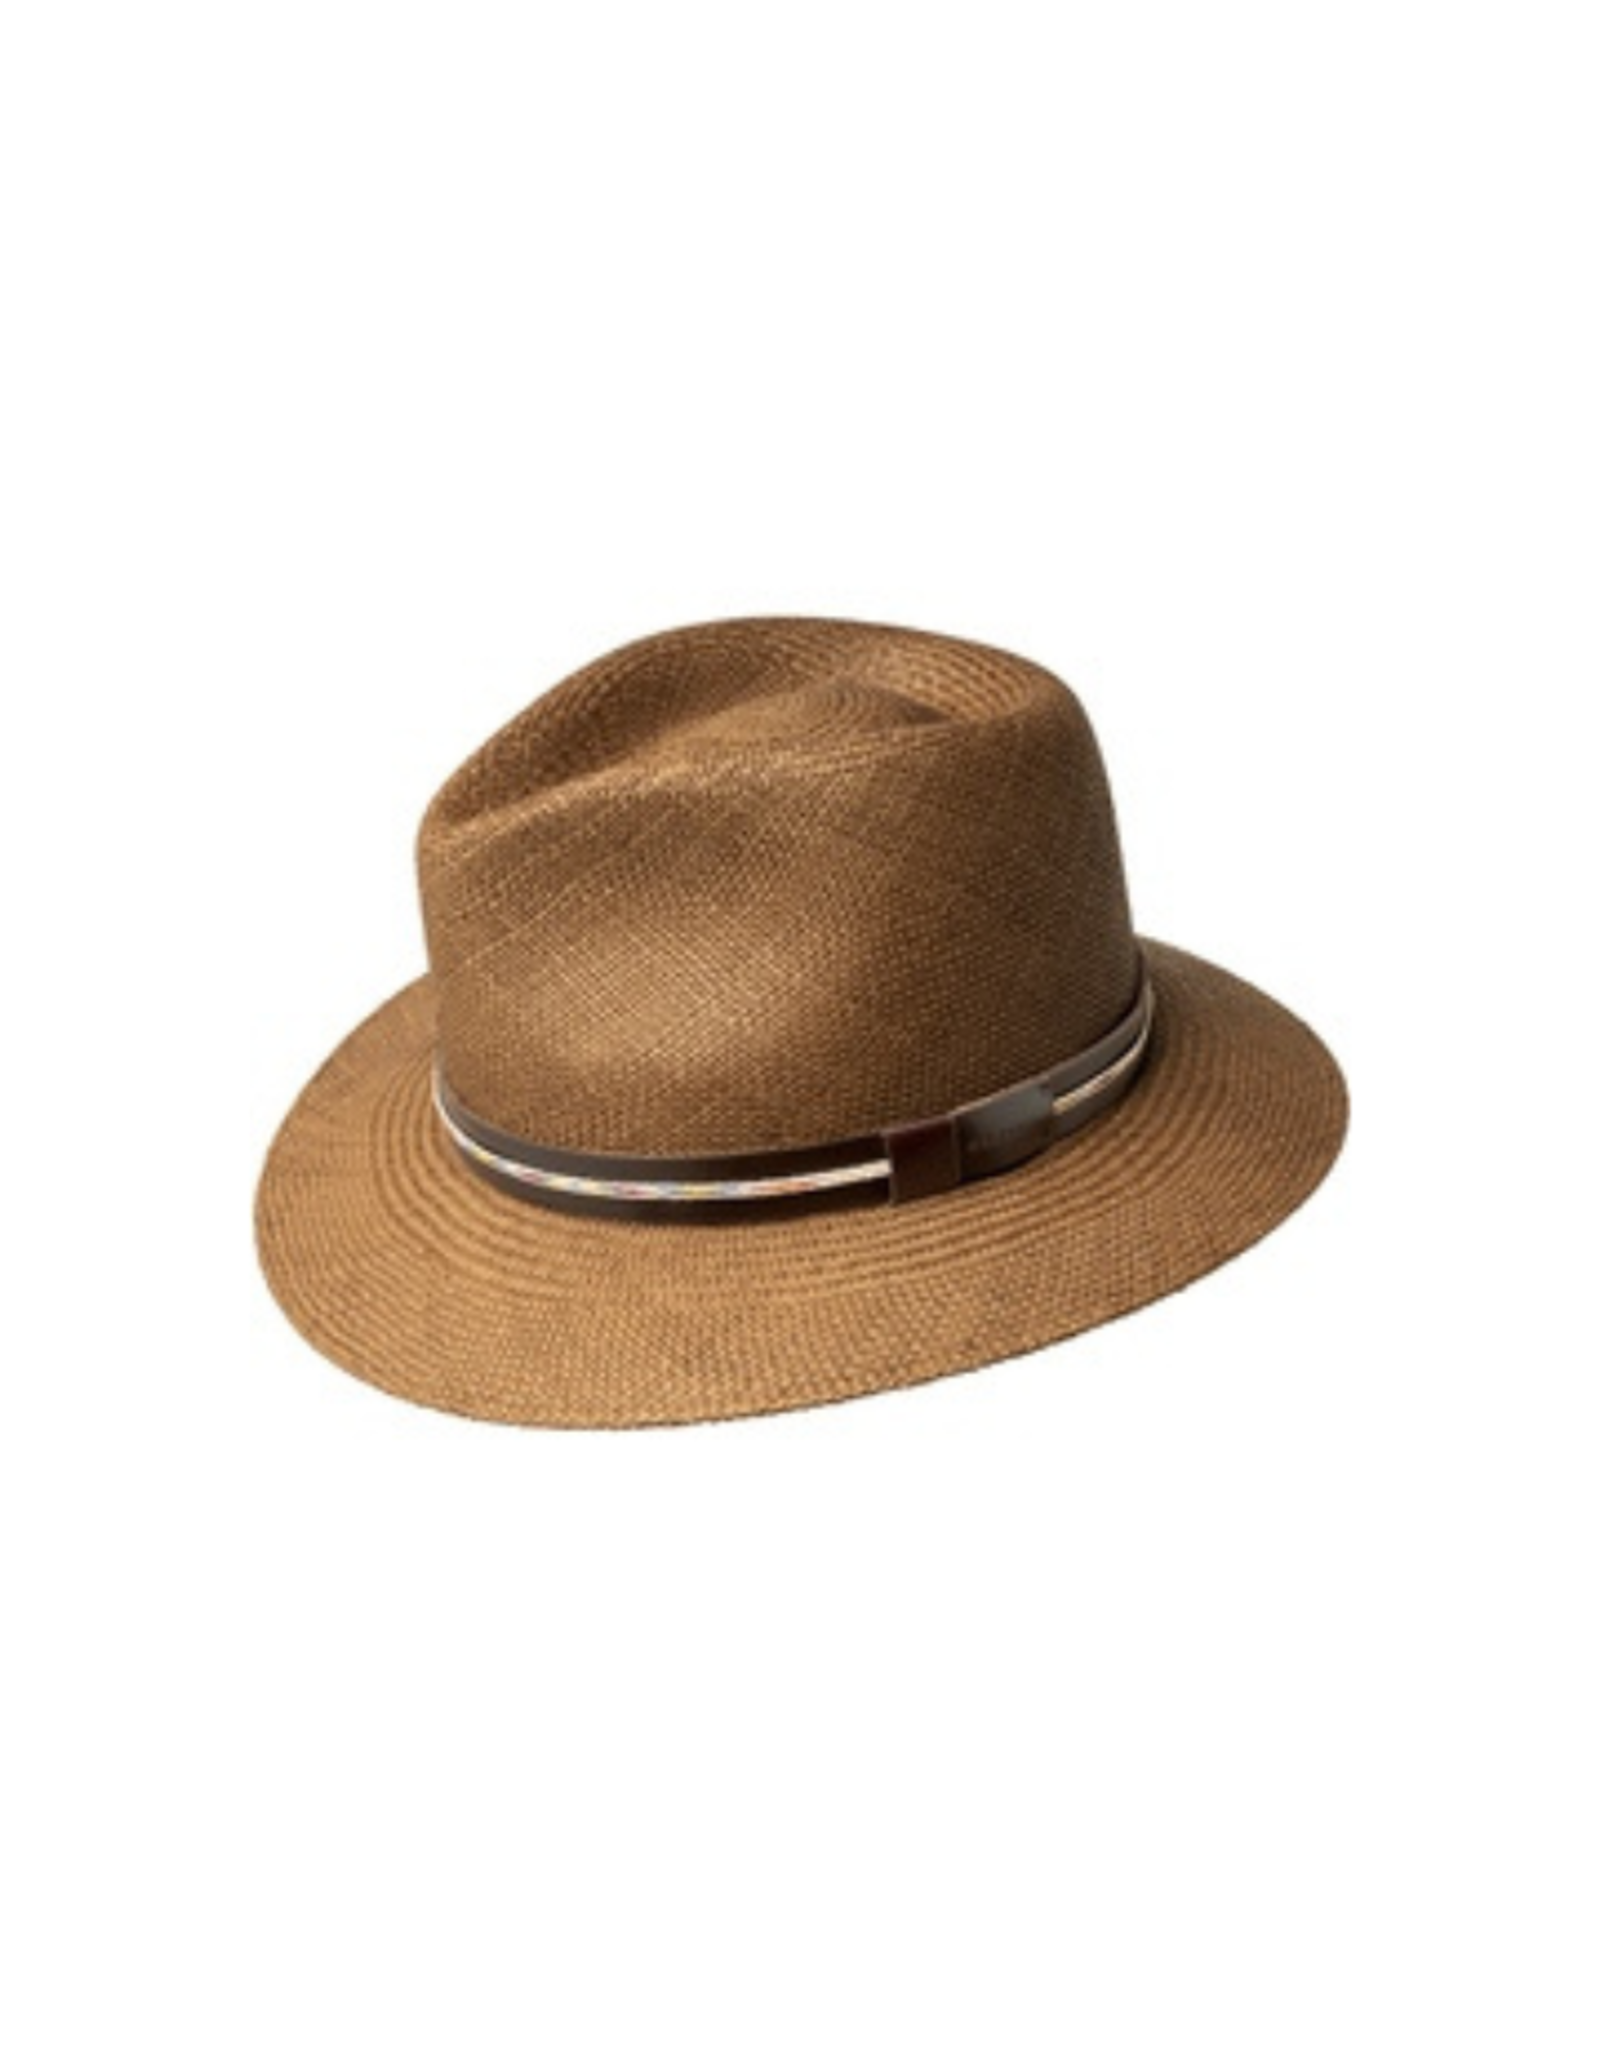 Bailey 1922 HAT-PANAMA "STANSFIELD"